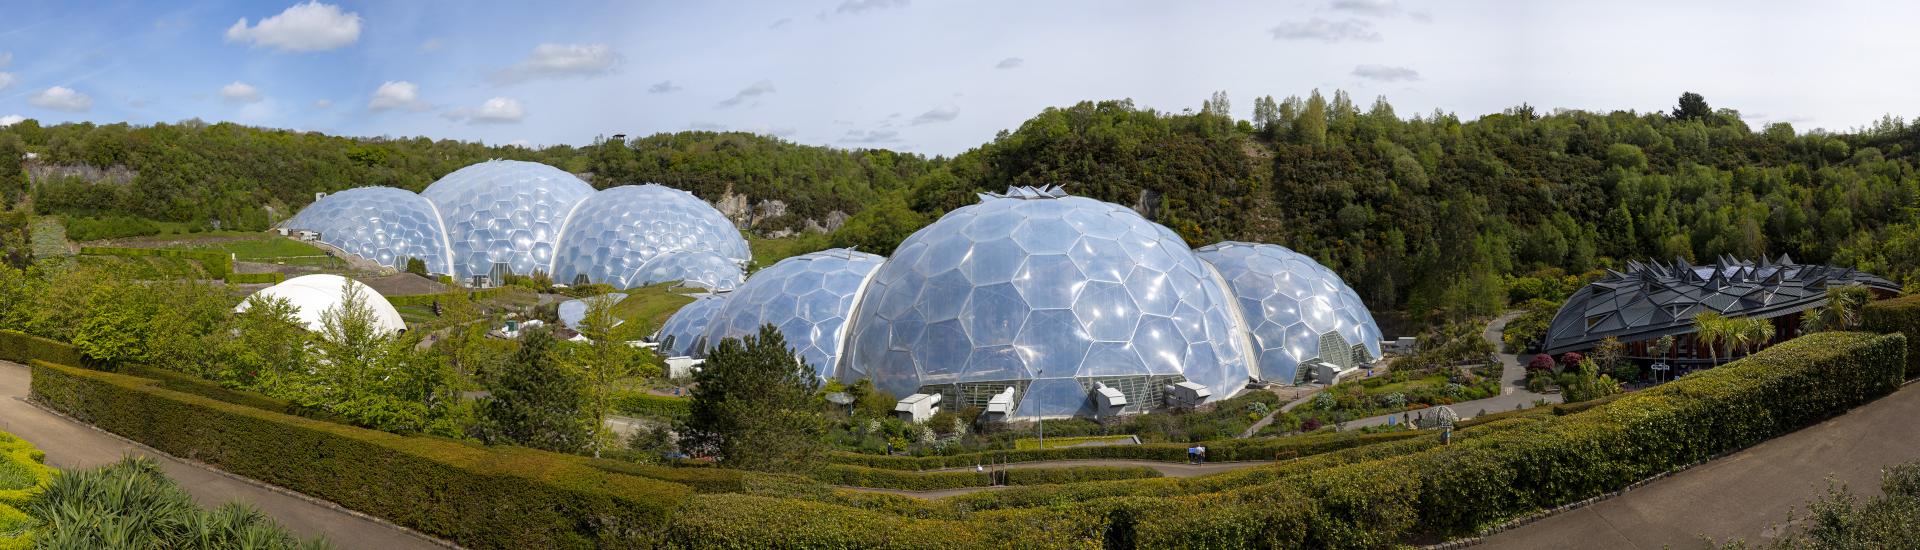 Panorama of Eden Project, Cornwall